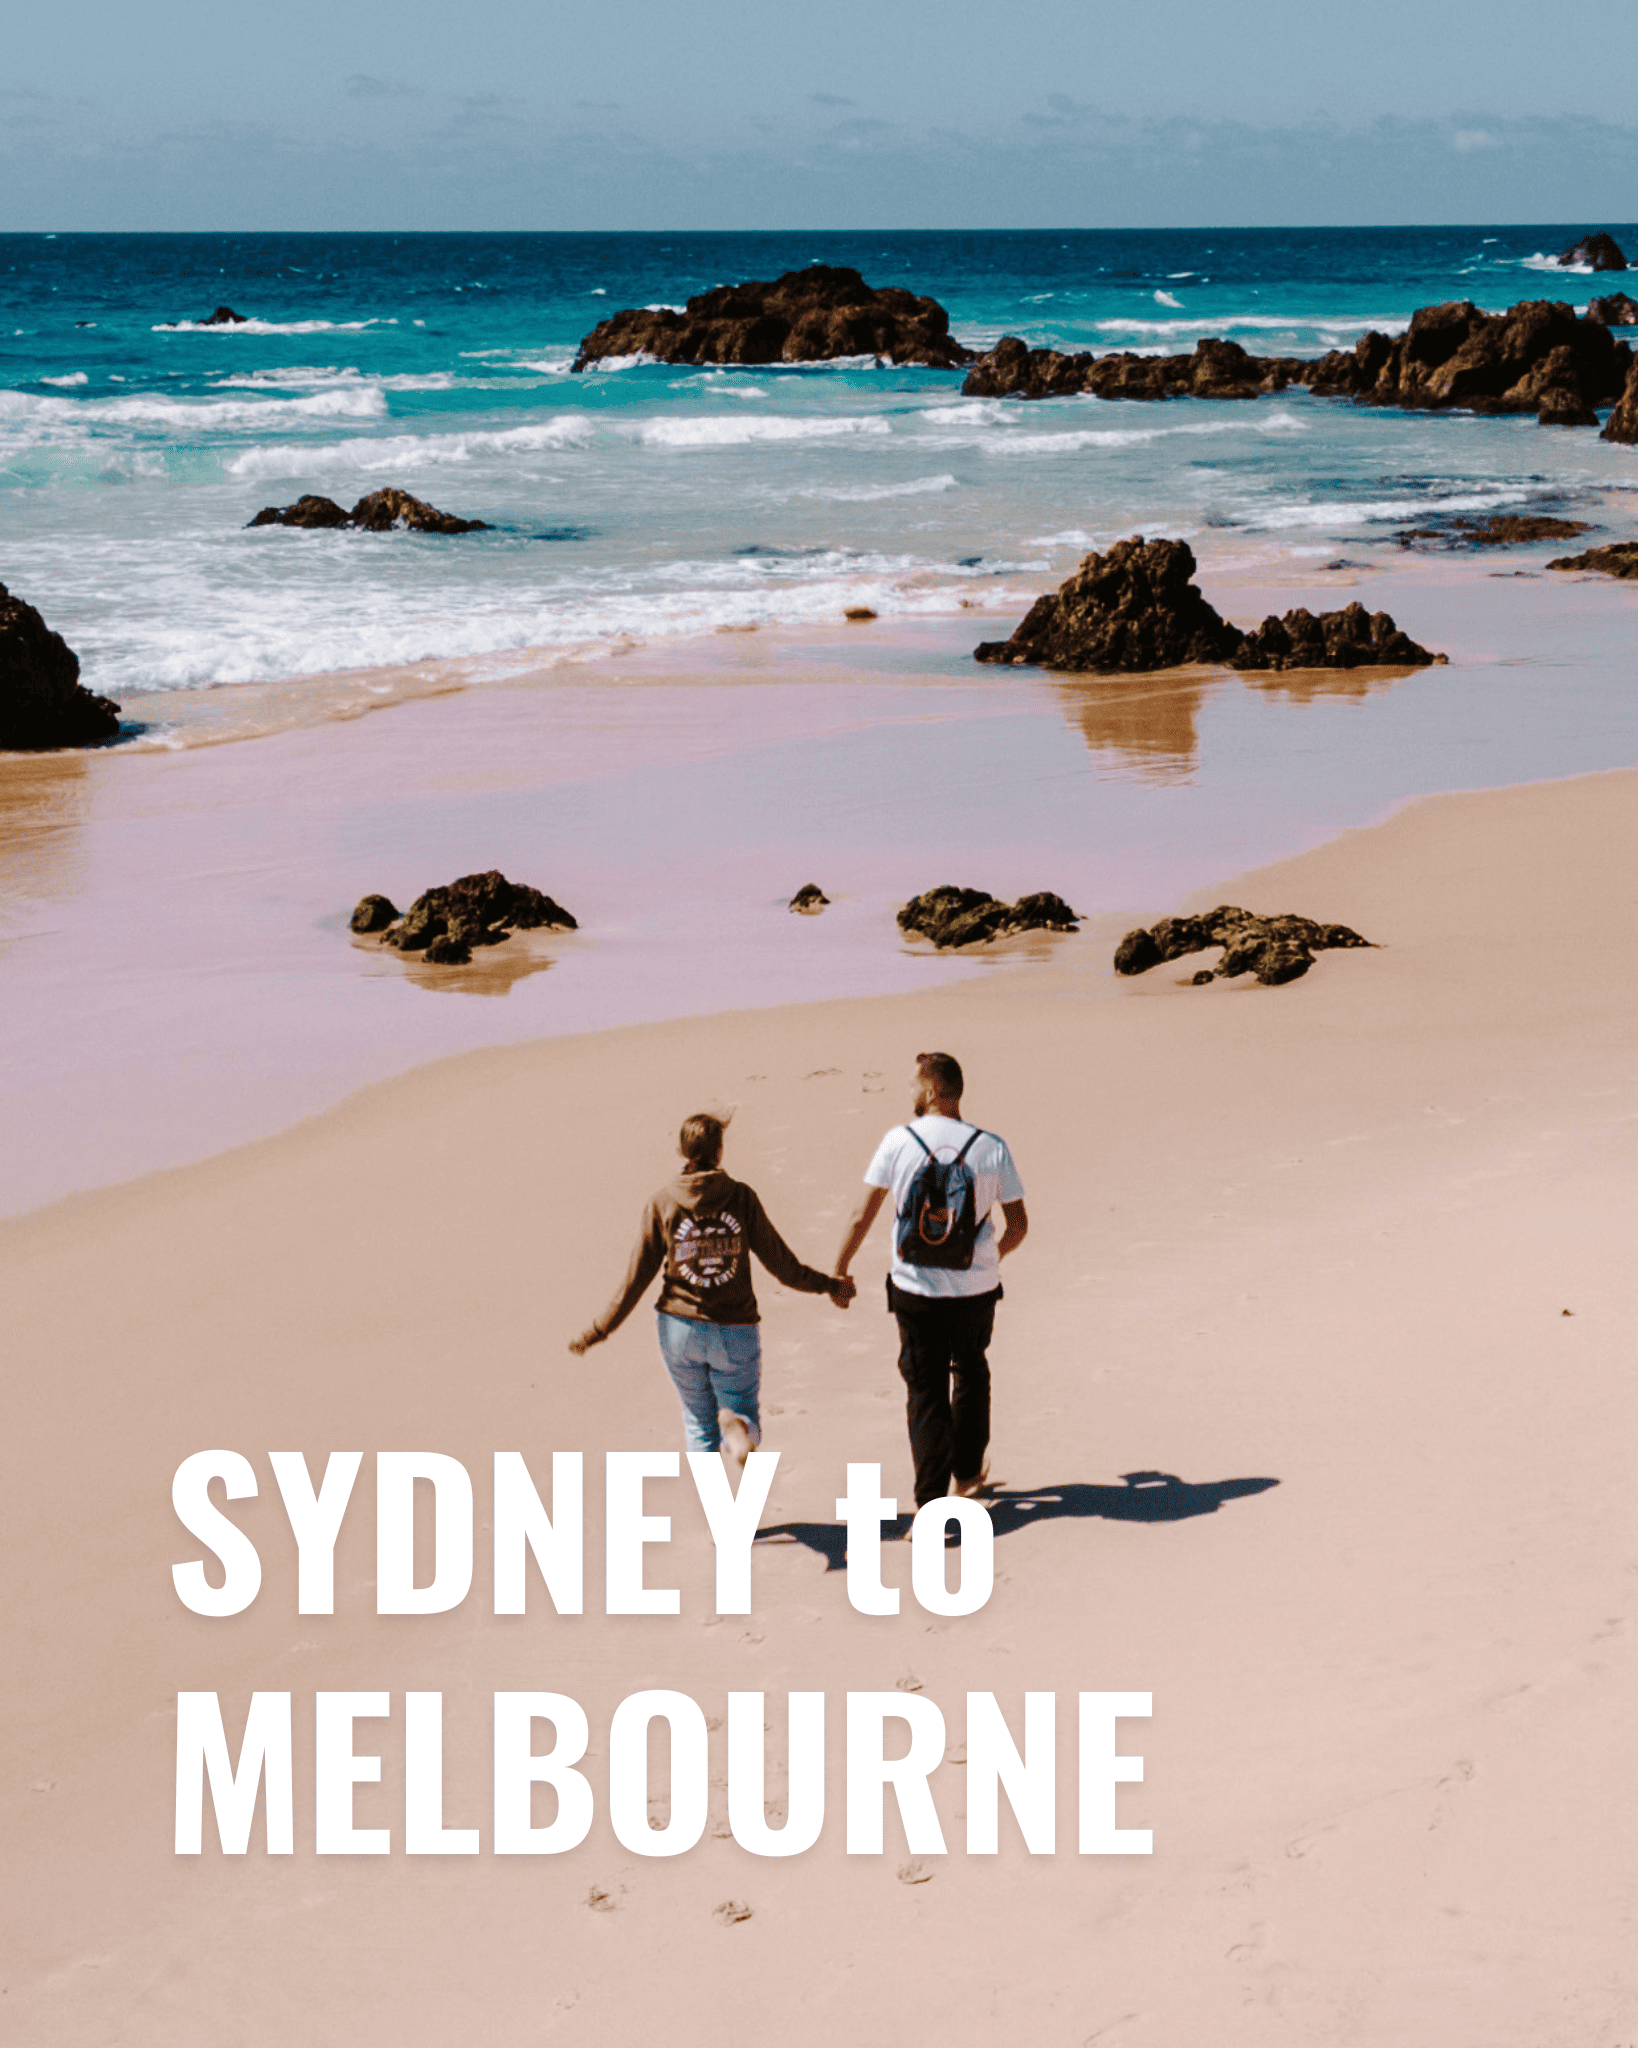 Australia Campervan Road Trip: 11 Best Places and Beaches From Sydney to Melbourne brisbane